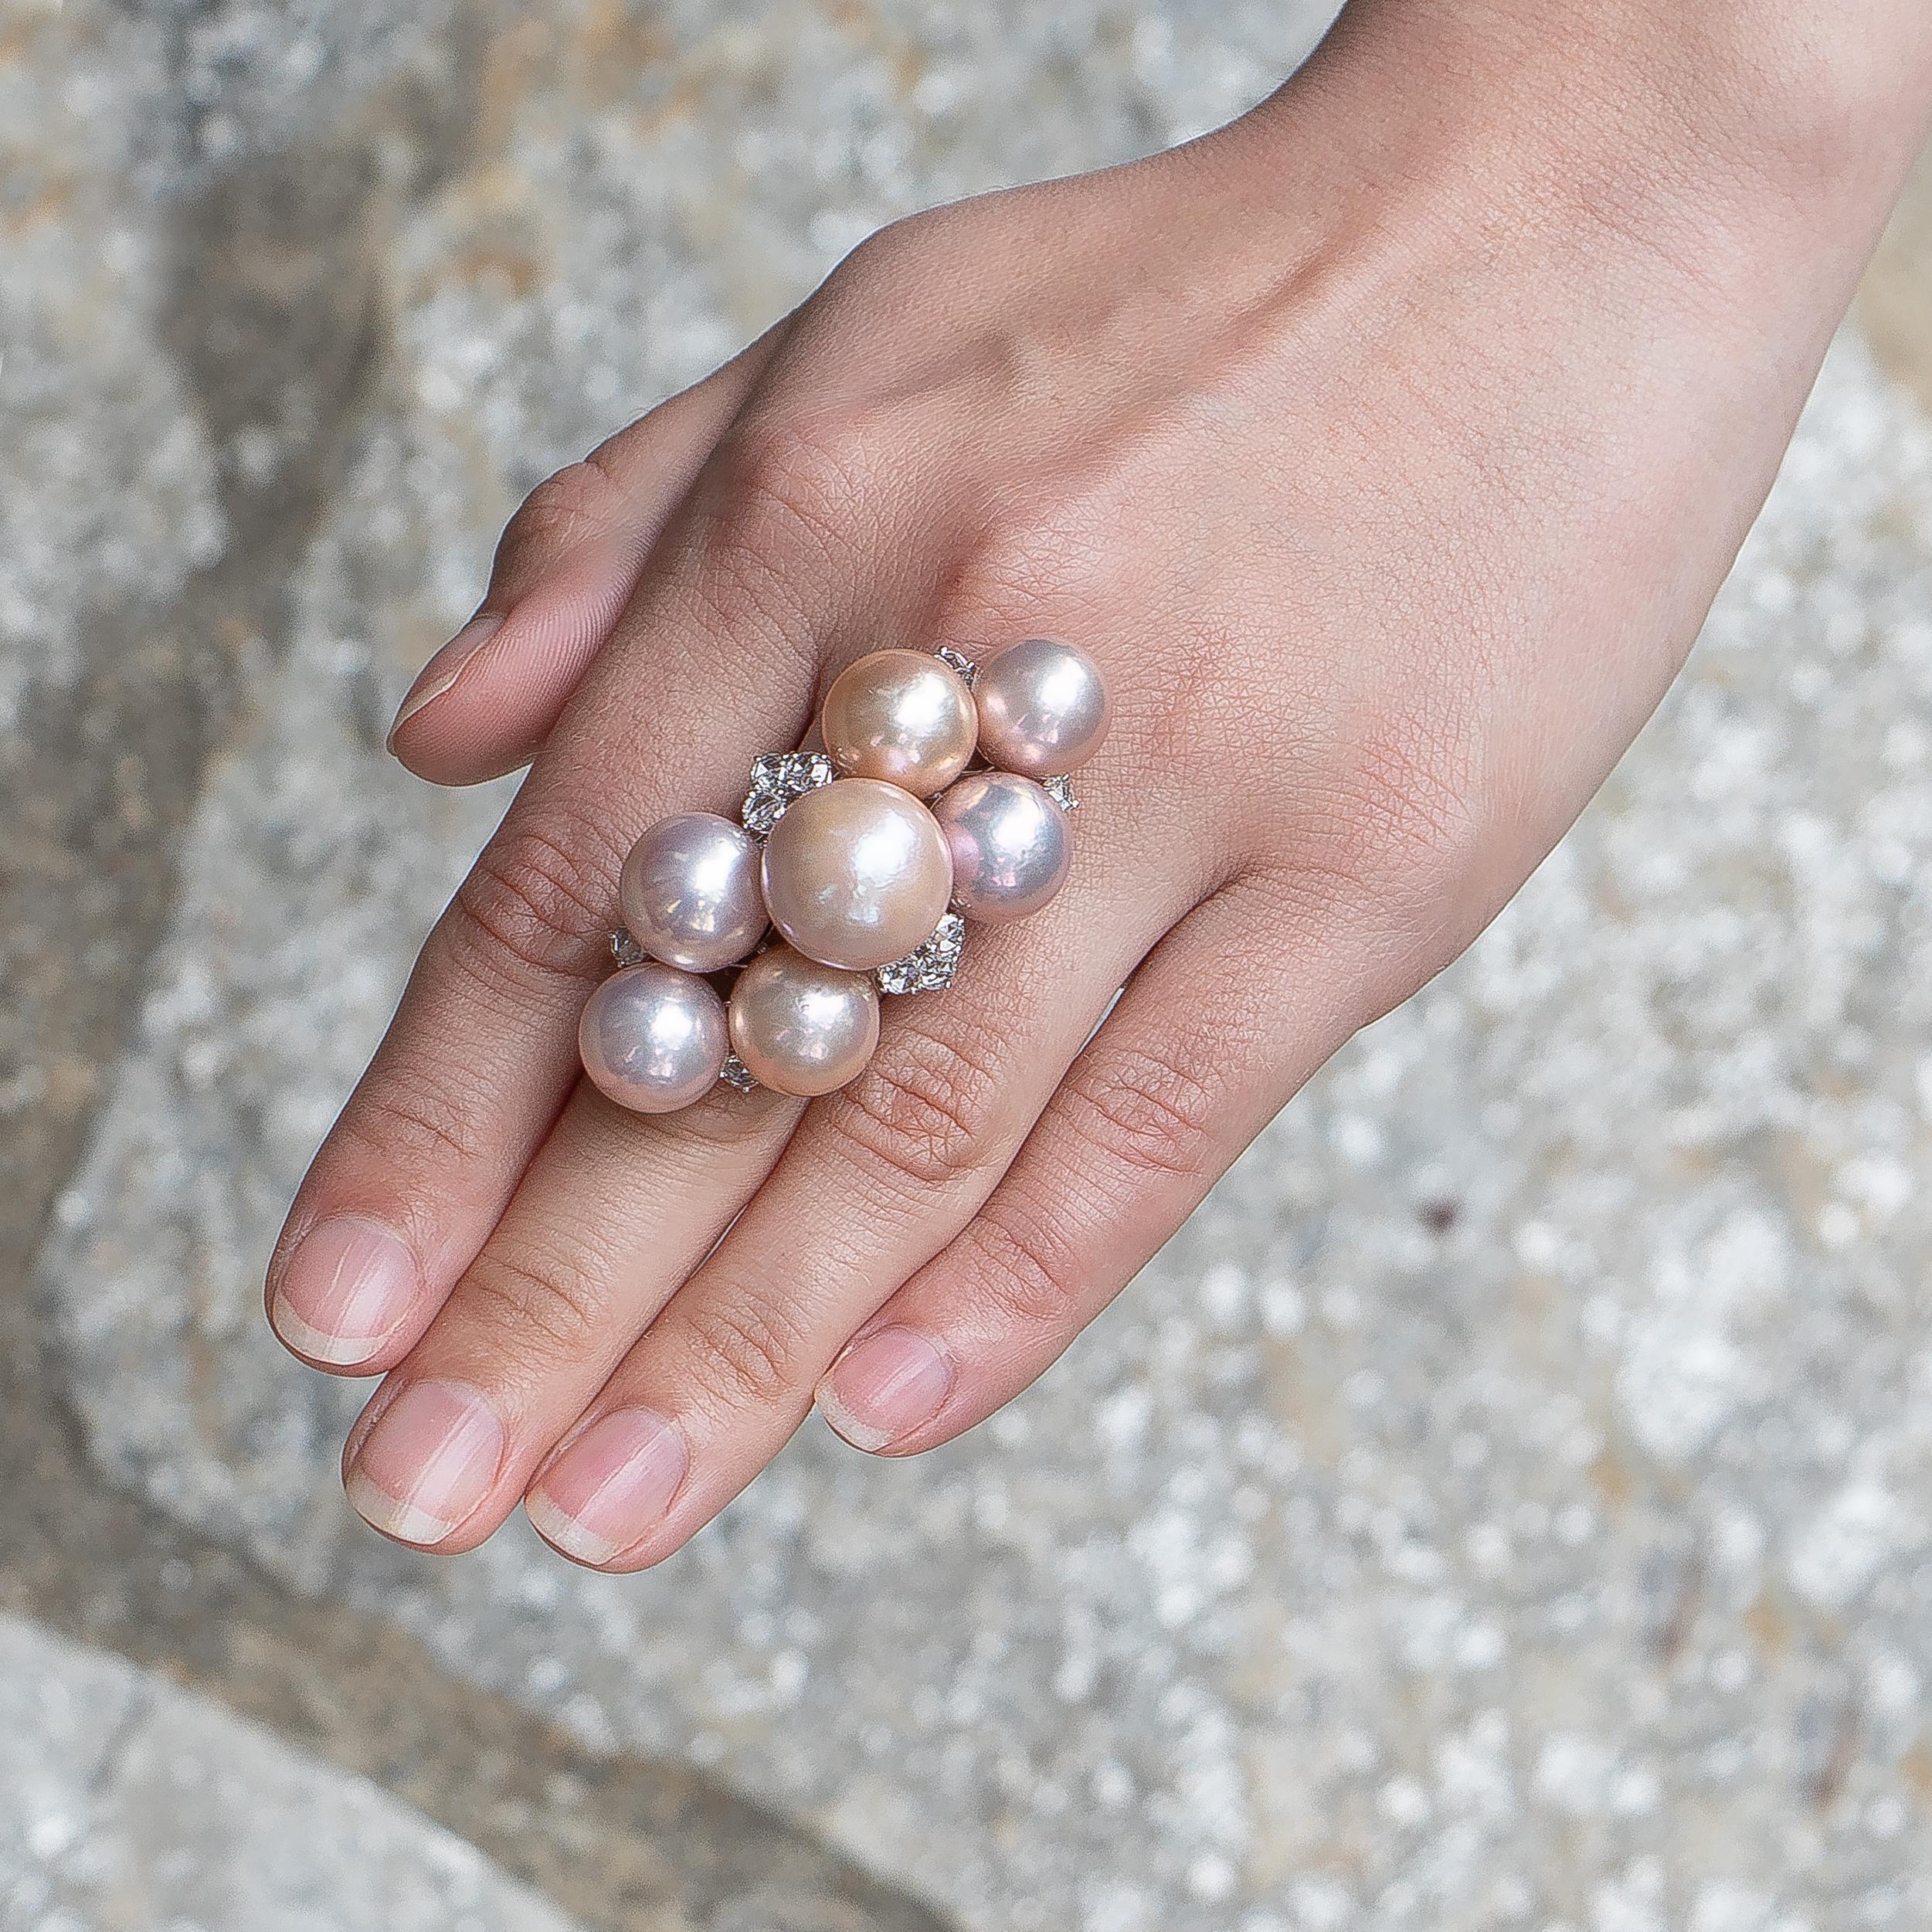 This beautiful ring is large but in a good way! It attracts the right kind of attention, and will always be the star of the show.
Pearls = 7 various sizes
Diamonds = 0.94 carats
( Color: F-G, Clarity: VS )
Ring Size = 5.75
Complimentary Ring Sizing